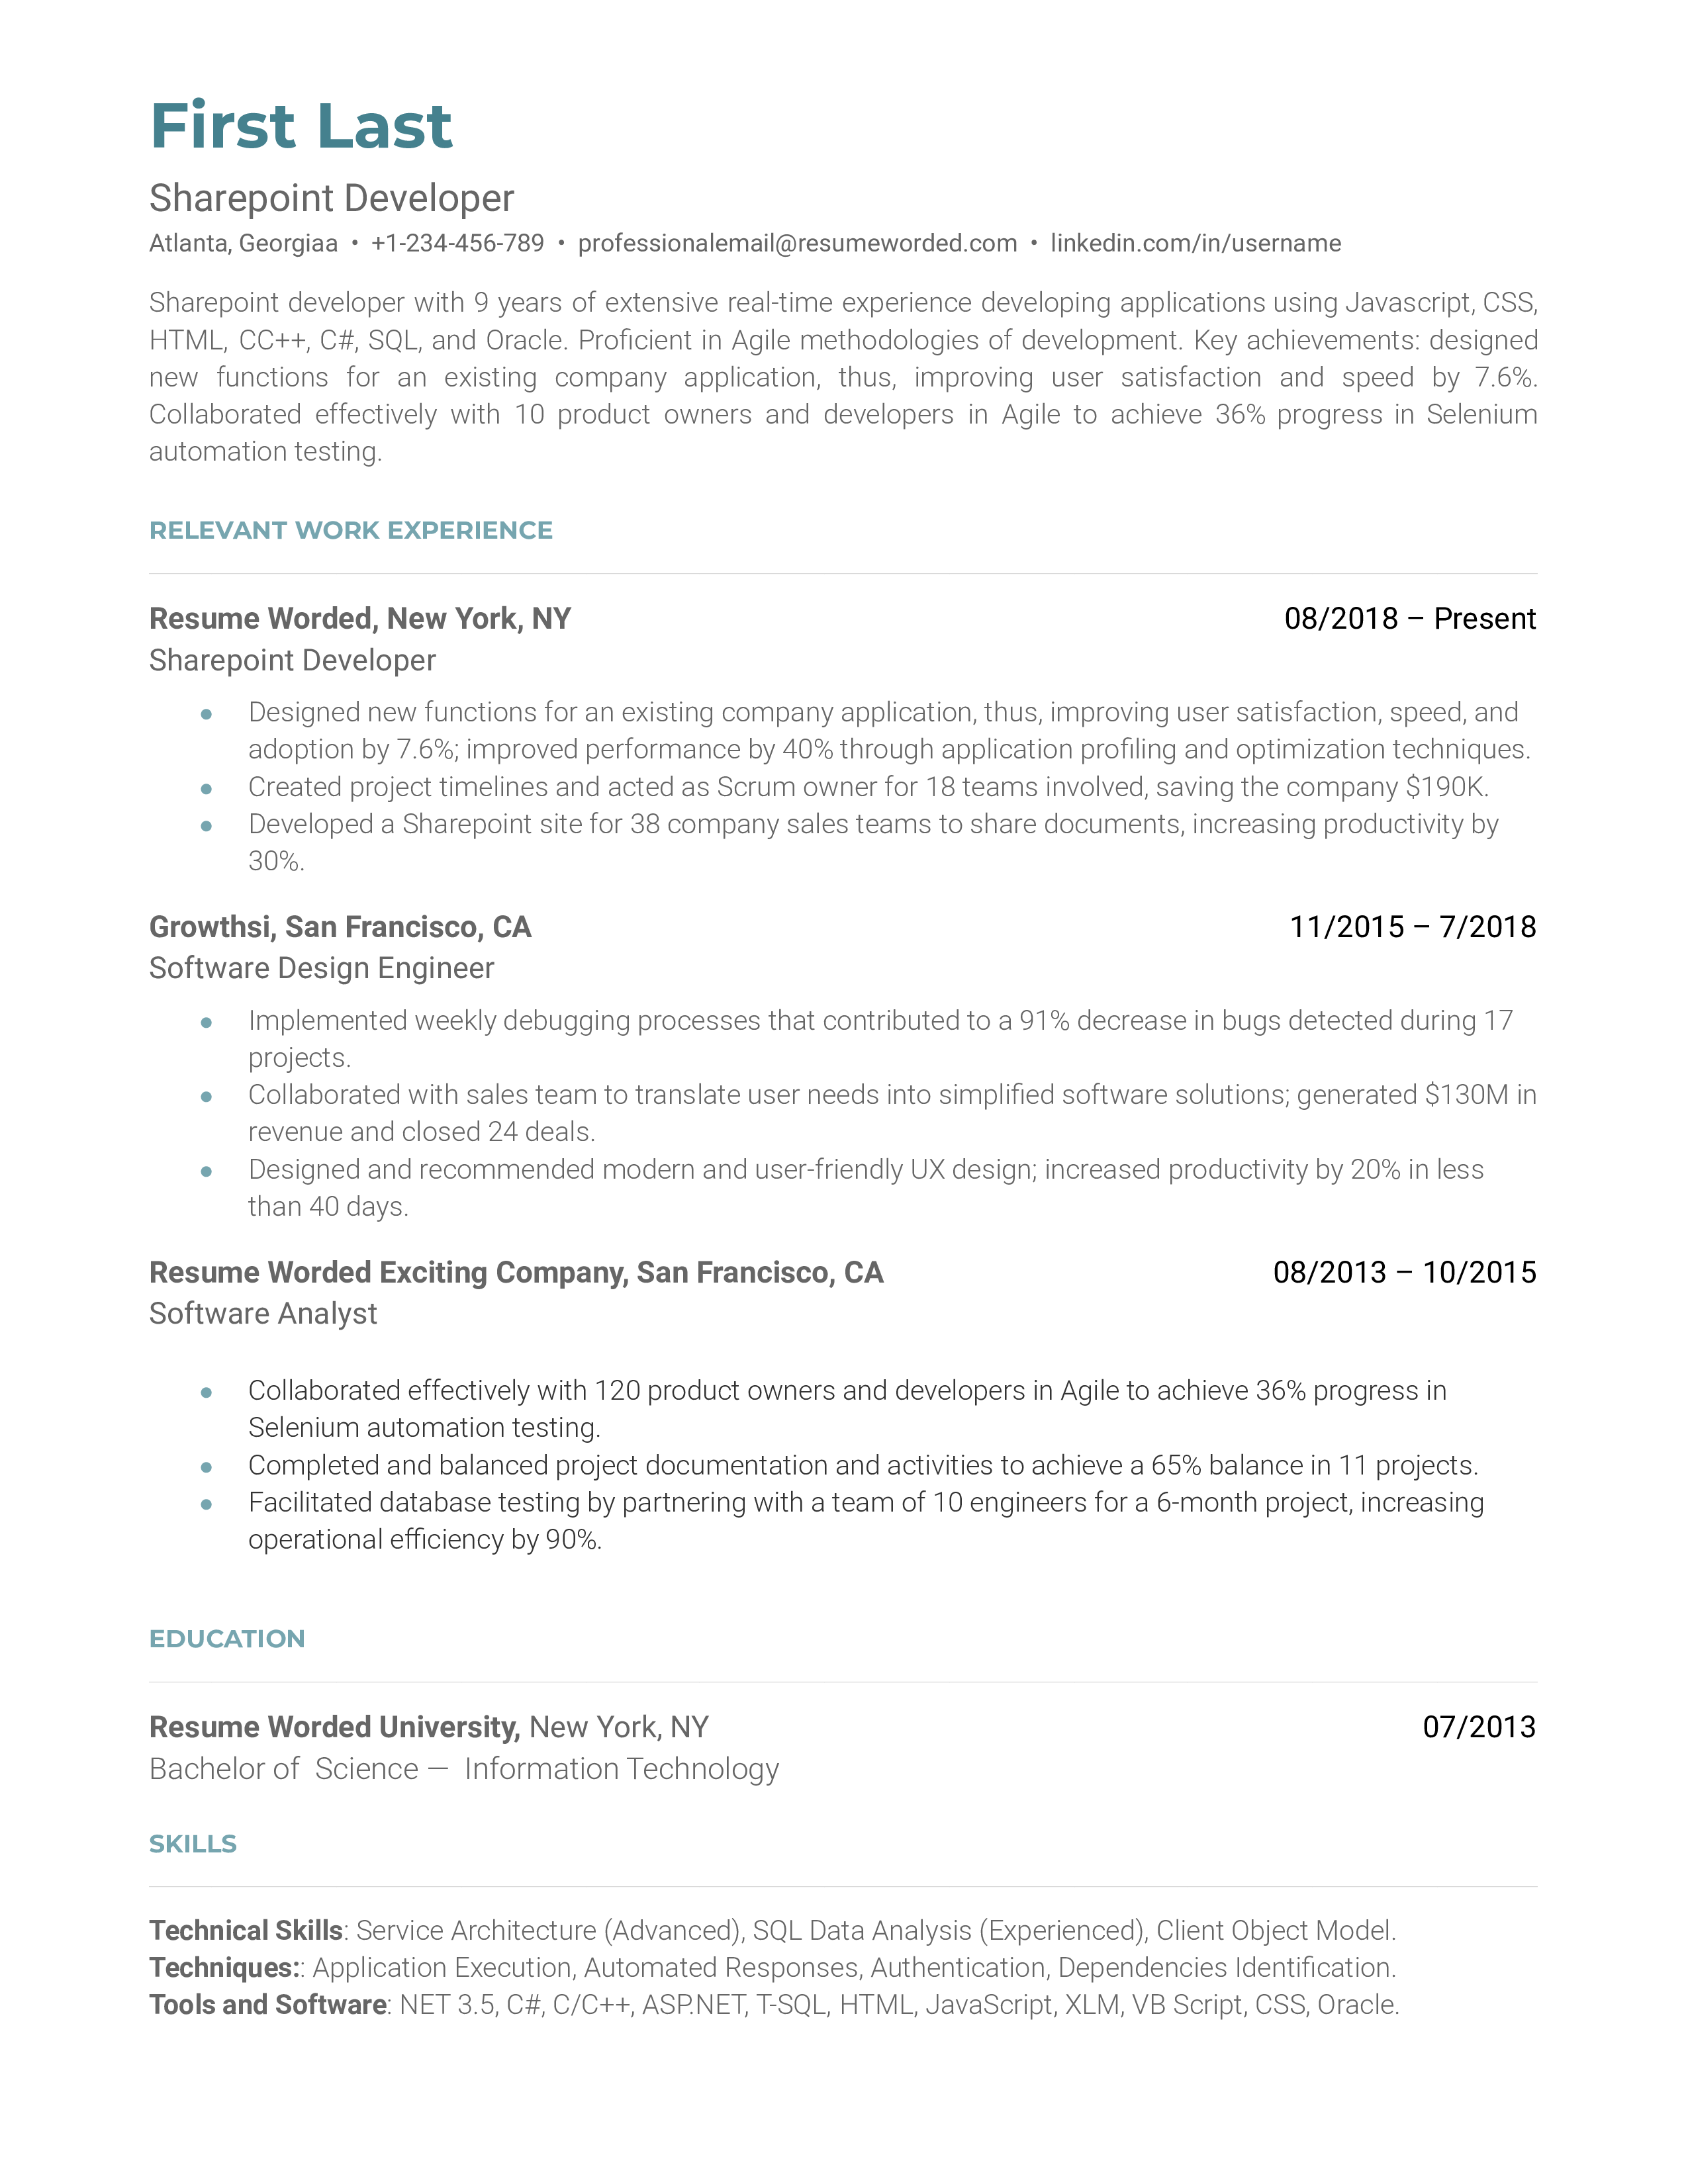 A SharePoint developer resume example that includes a brief description and relevant work experience